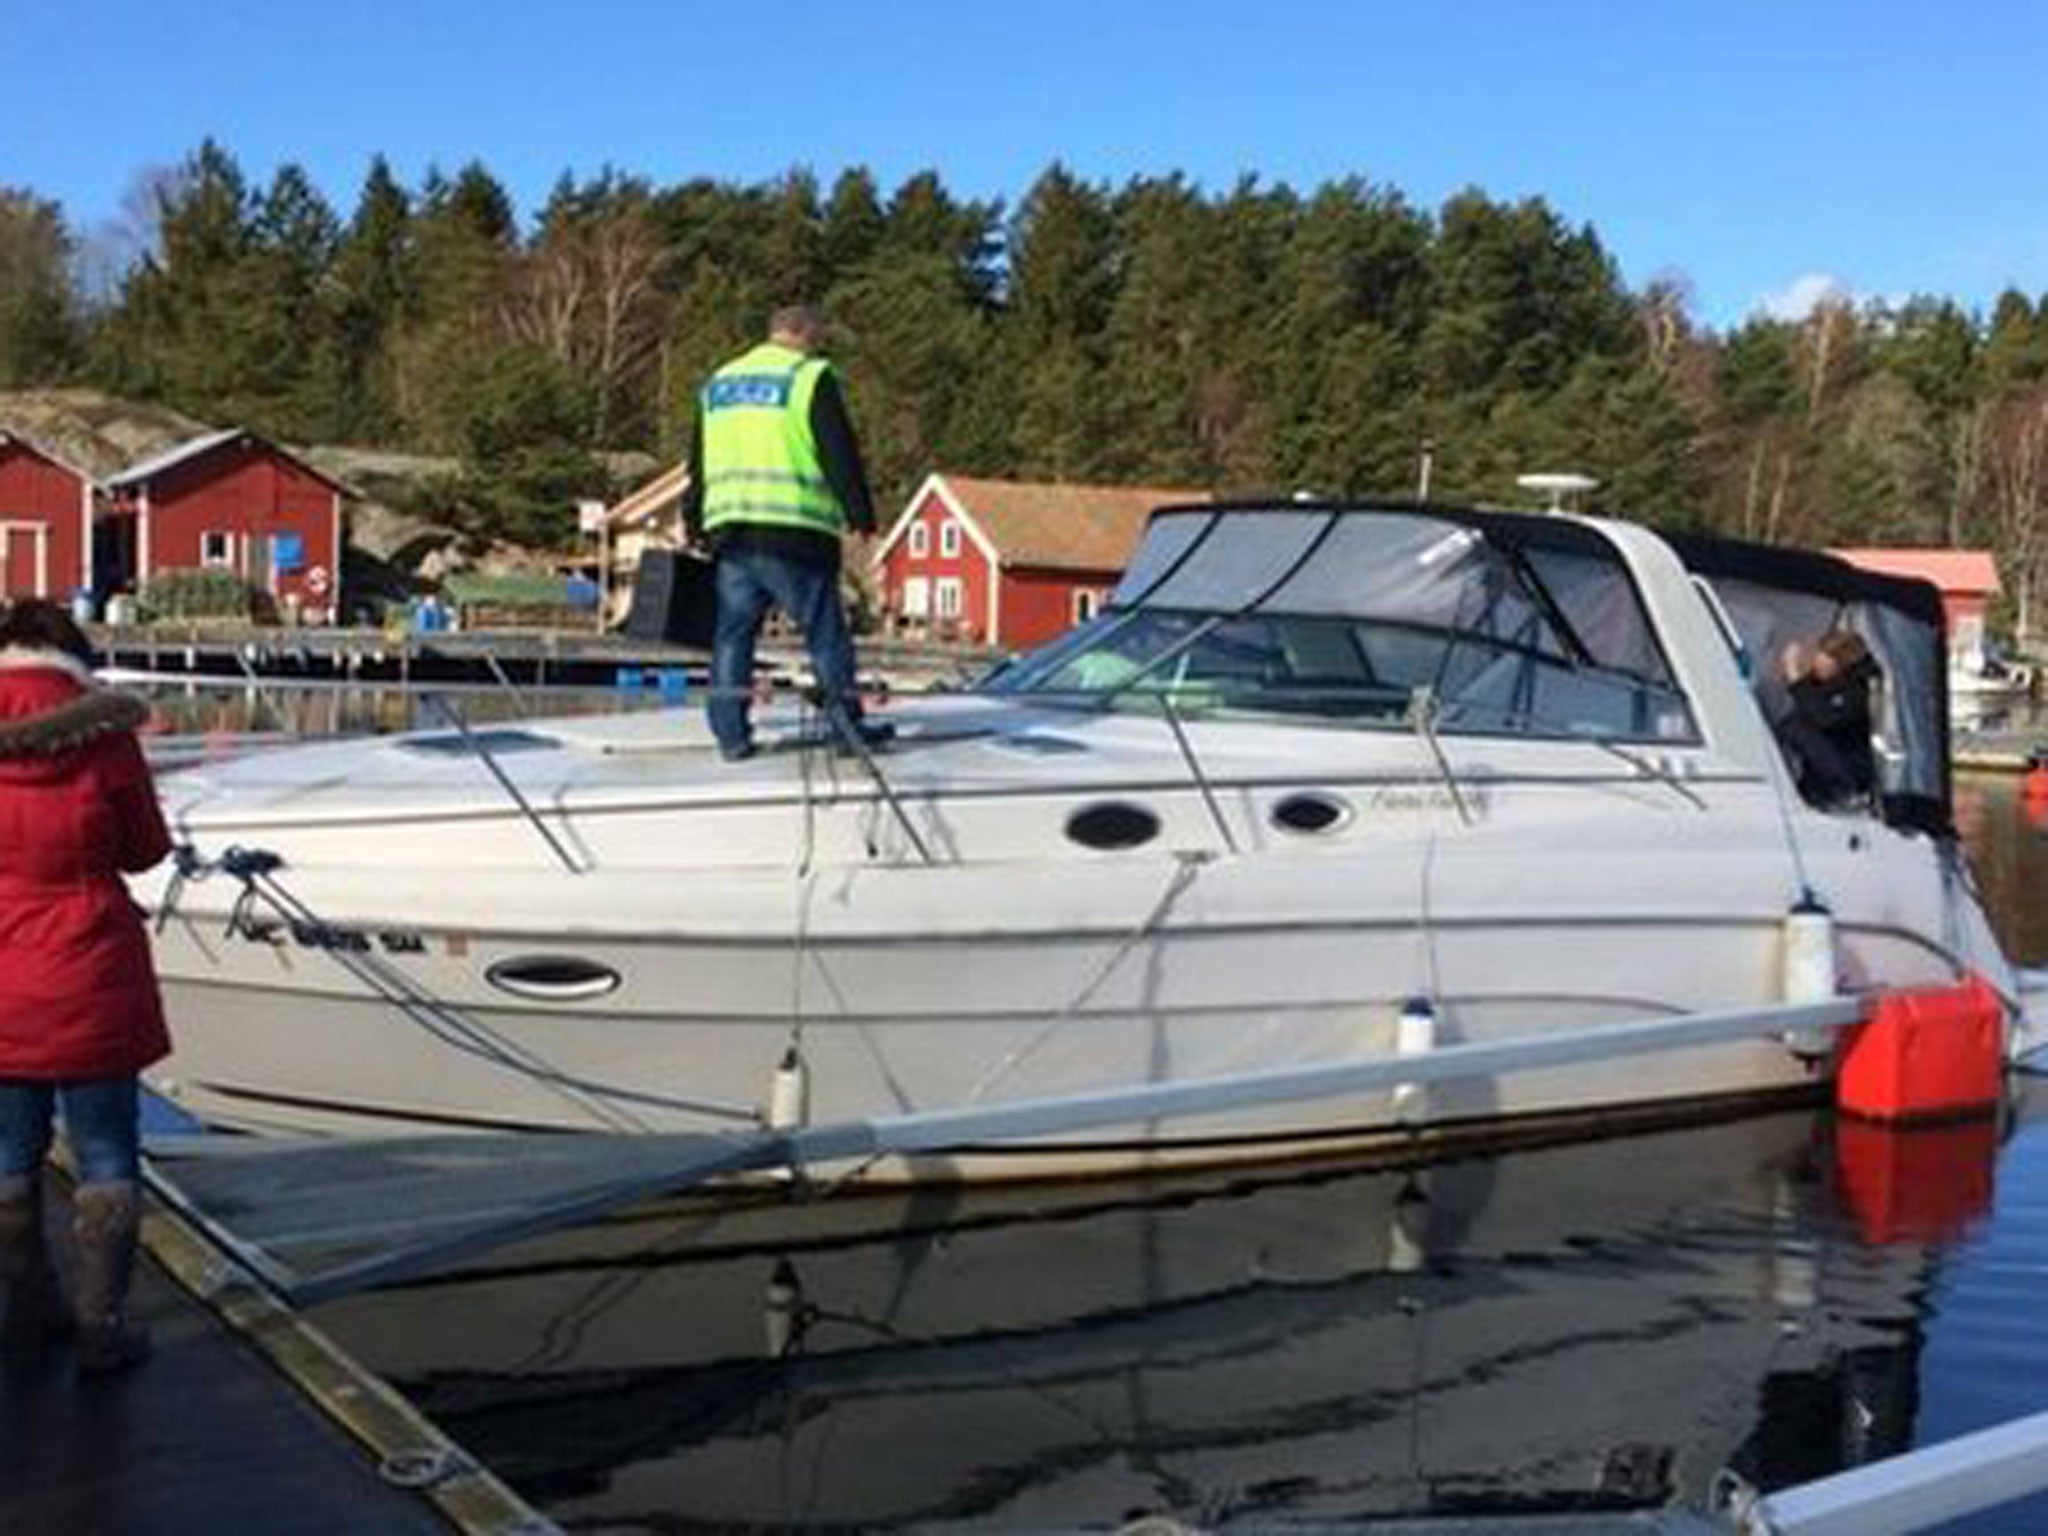 According to Expressen GT newspaper the boat, which is thought to be worth as much as $108,000 (£65,000), remained at the dock in Stromstad for at least two years, puzzling both the workers at the port and the police.